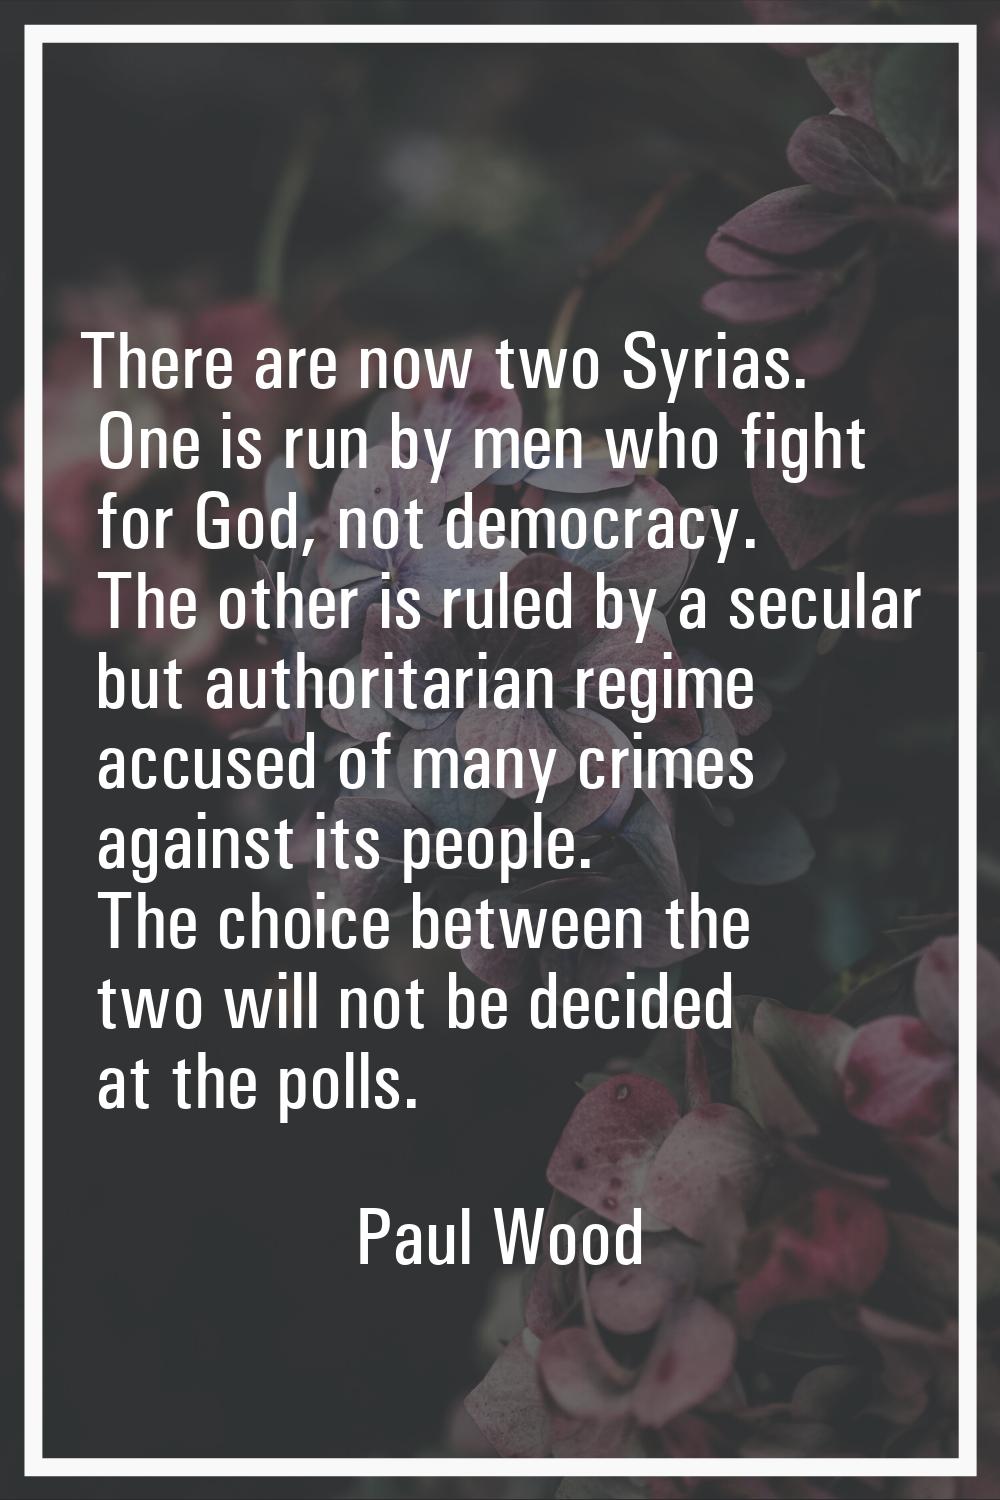 There are now two Syrias. One is run by men who fight for God, not democracy. The other is ruled by